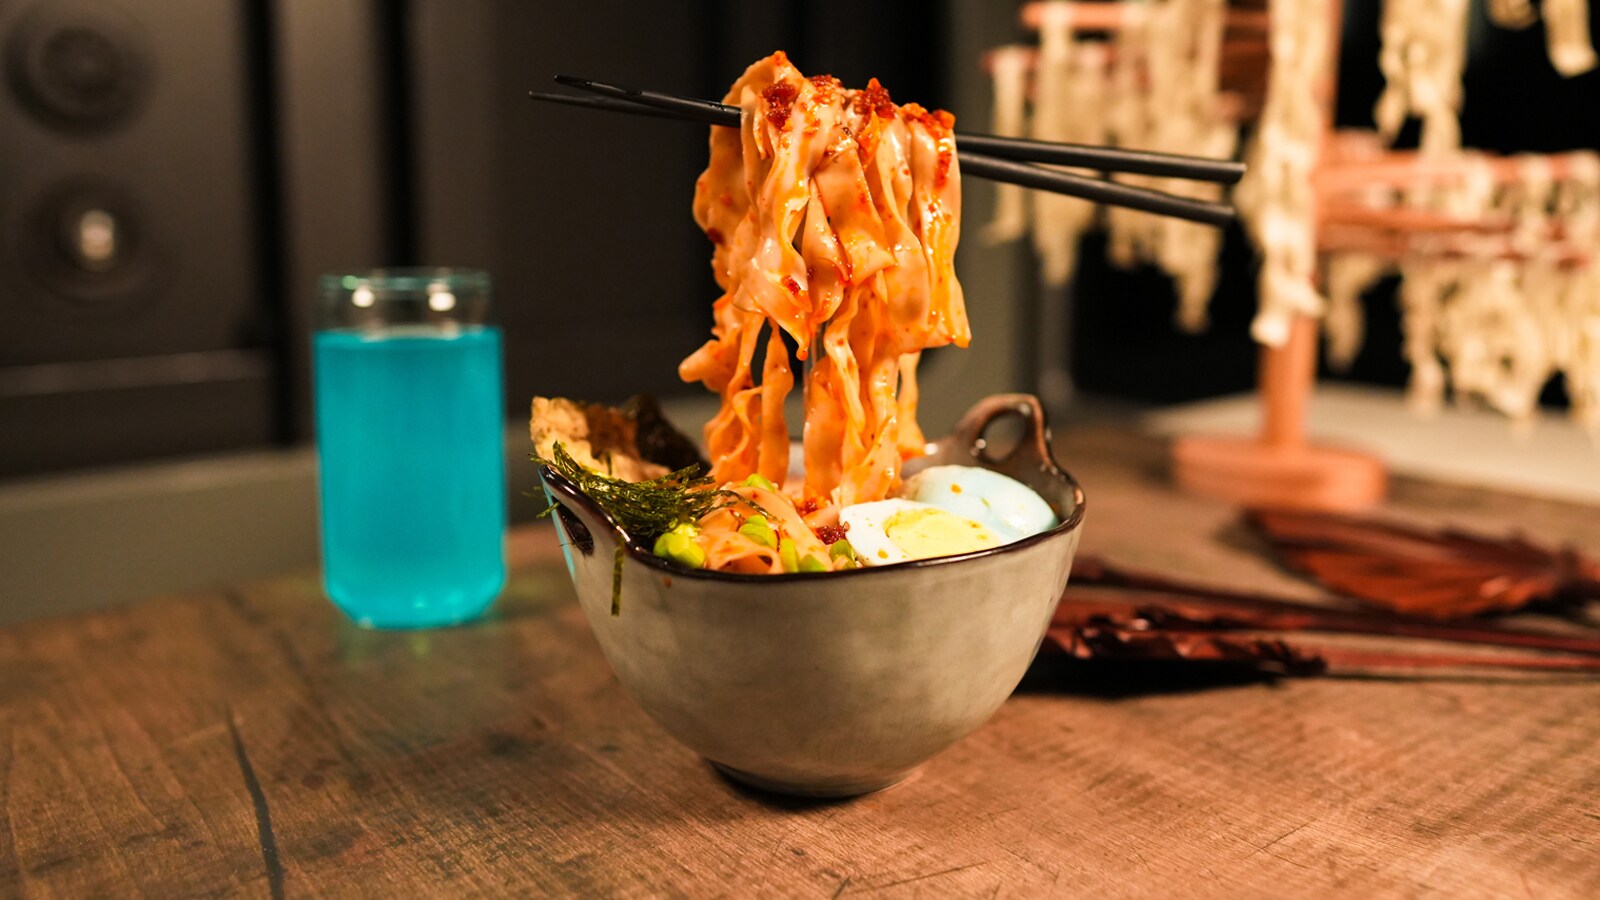 Take a Break from Hunting Jedi With a Bowl of The Acolyte-inspired Noodles 